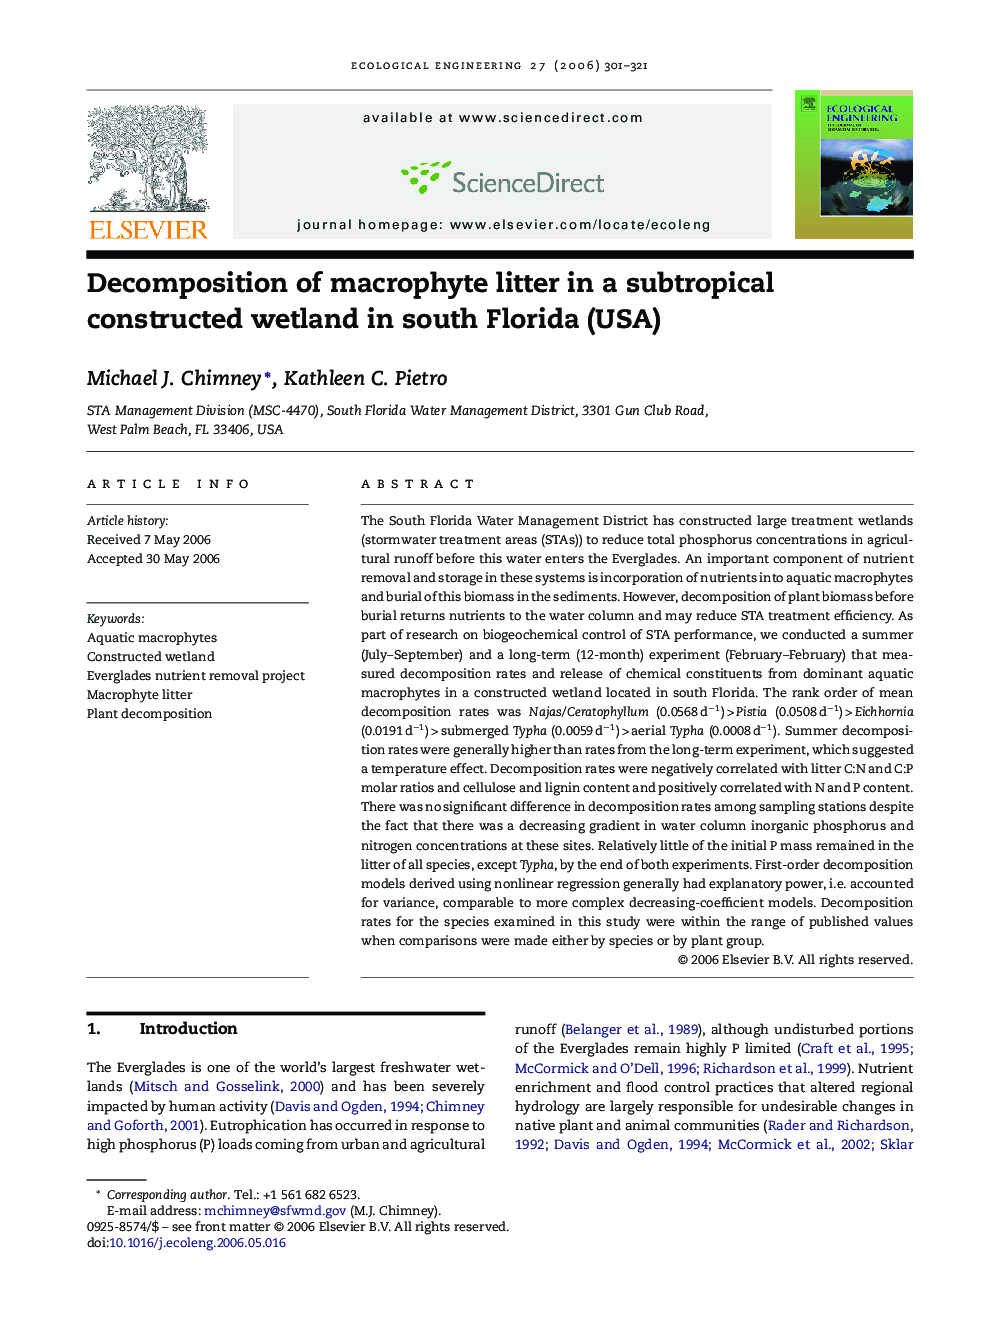 Decomposition of macrophyte litter in a subtropical constructed wetland in south Florida (USA)